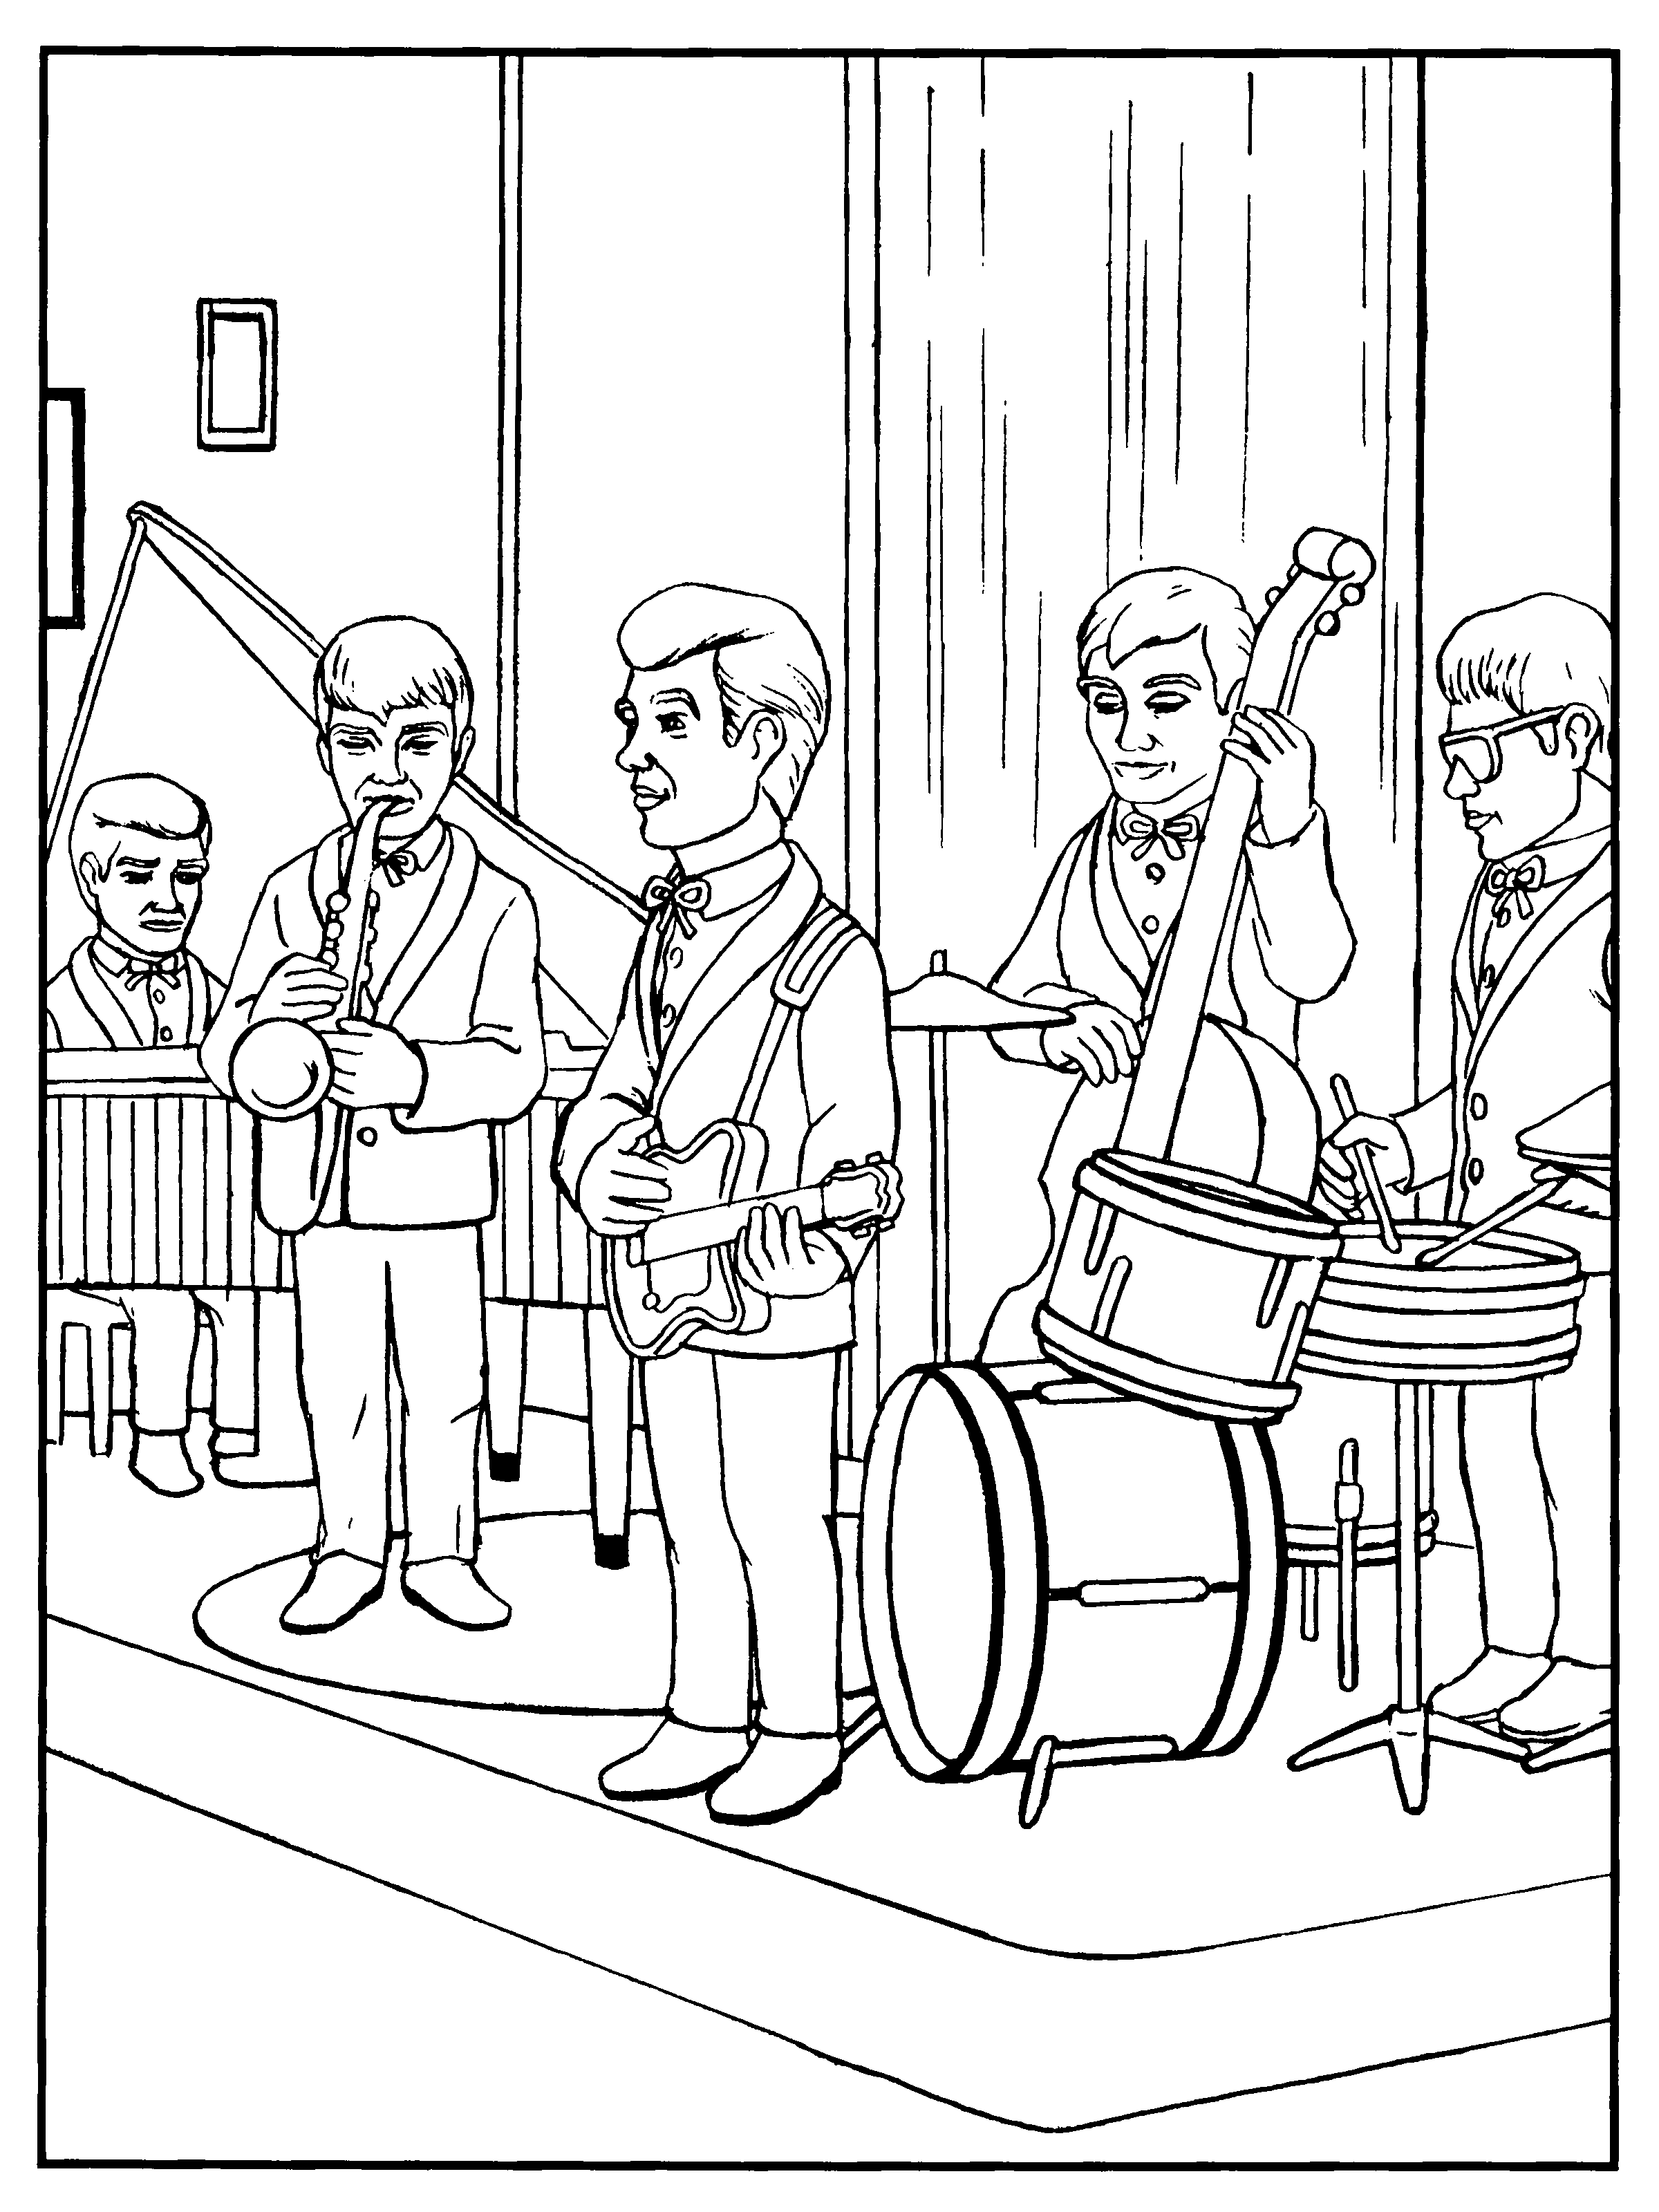 Coloring Pages Thunderbirds GIFs - PngGif